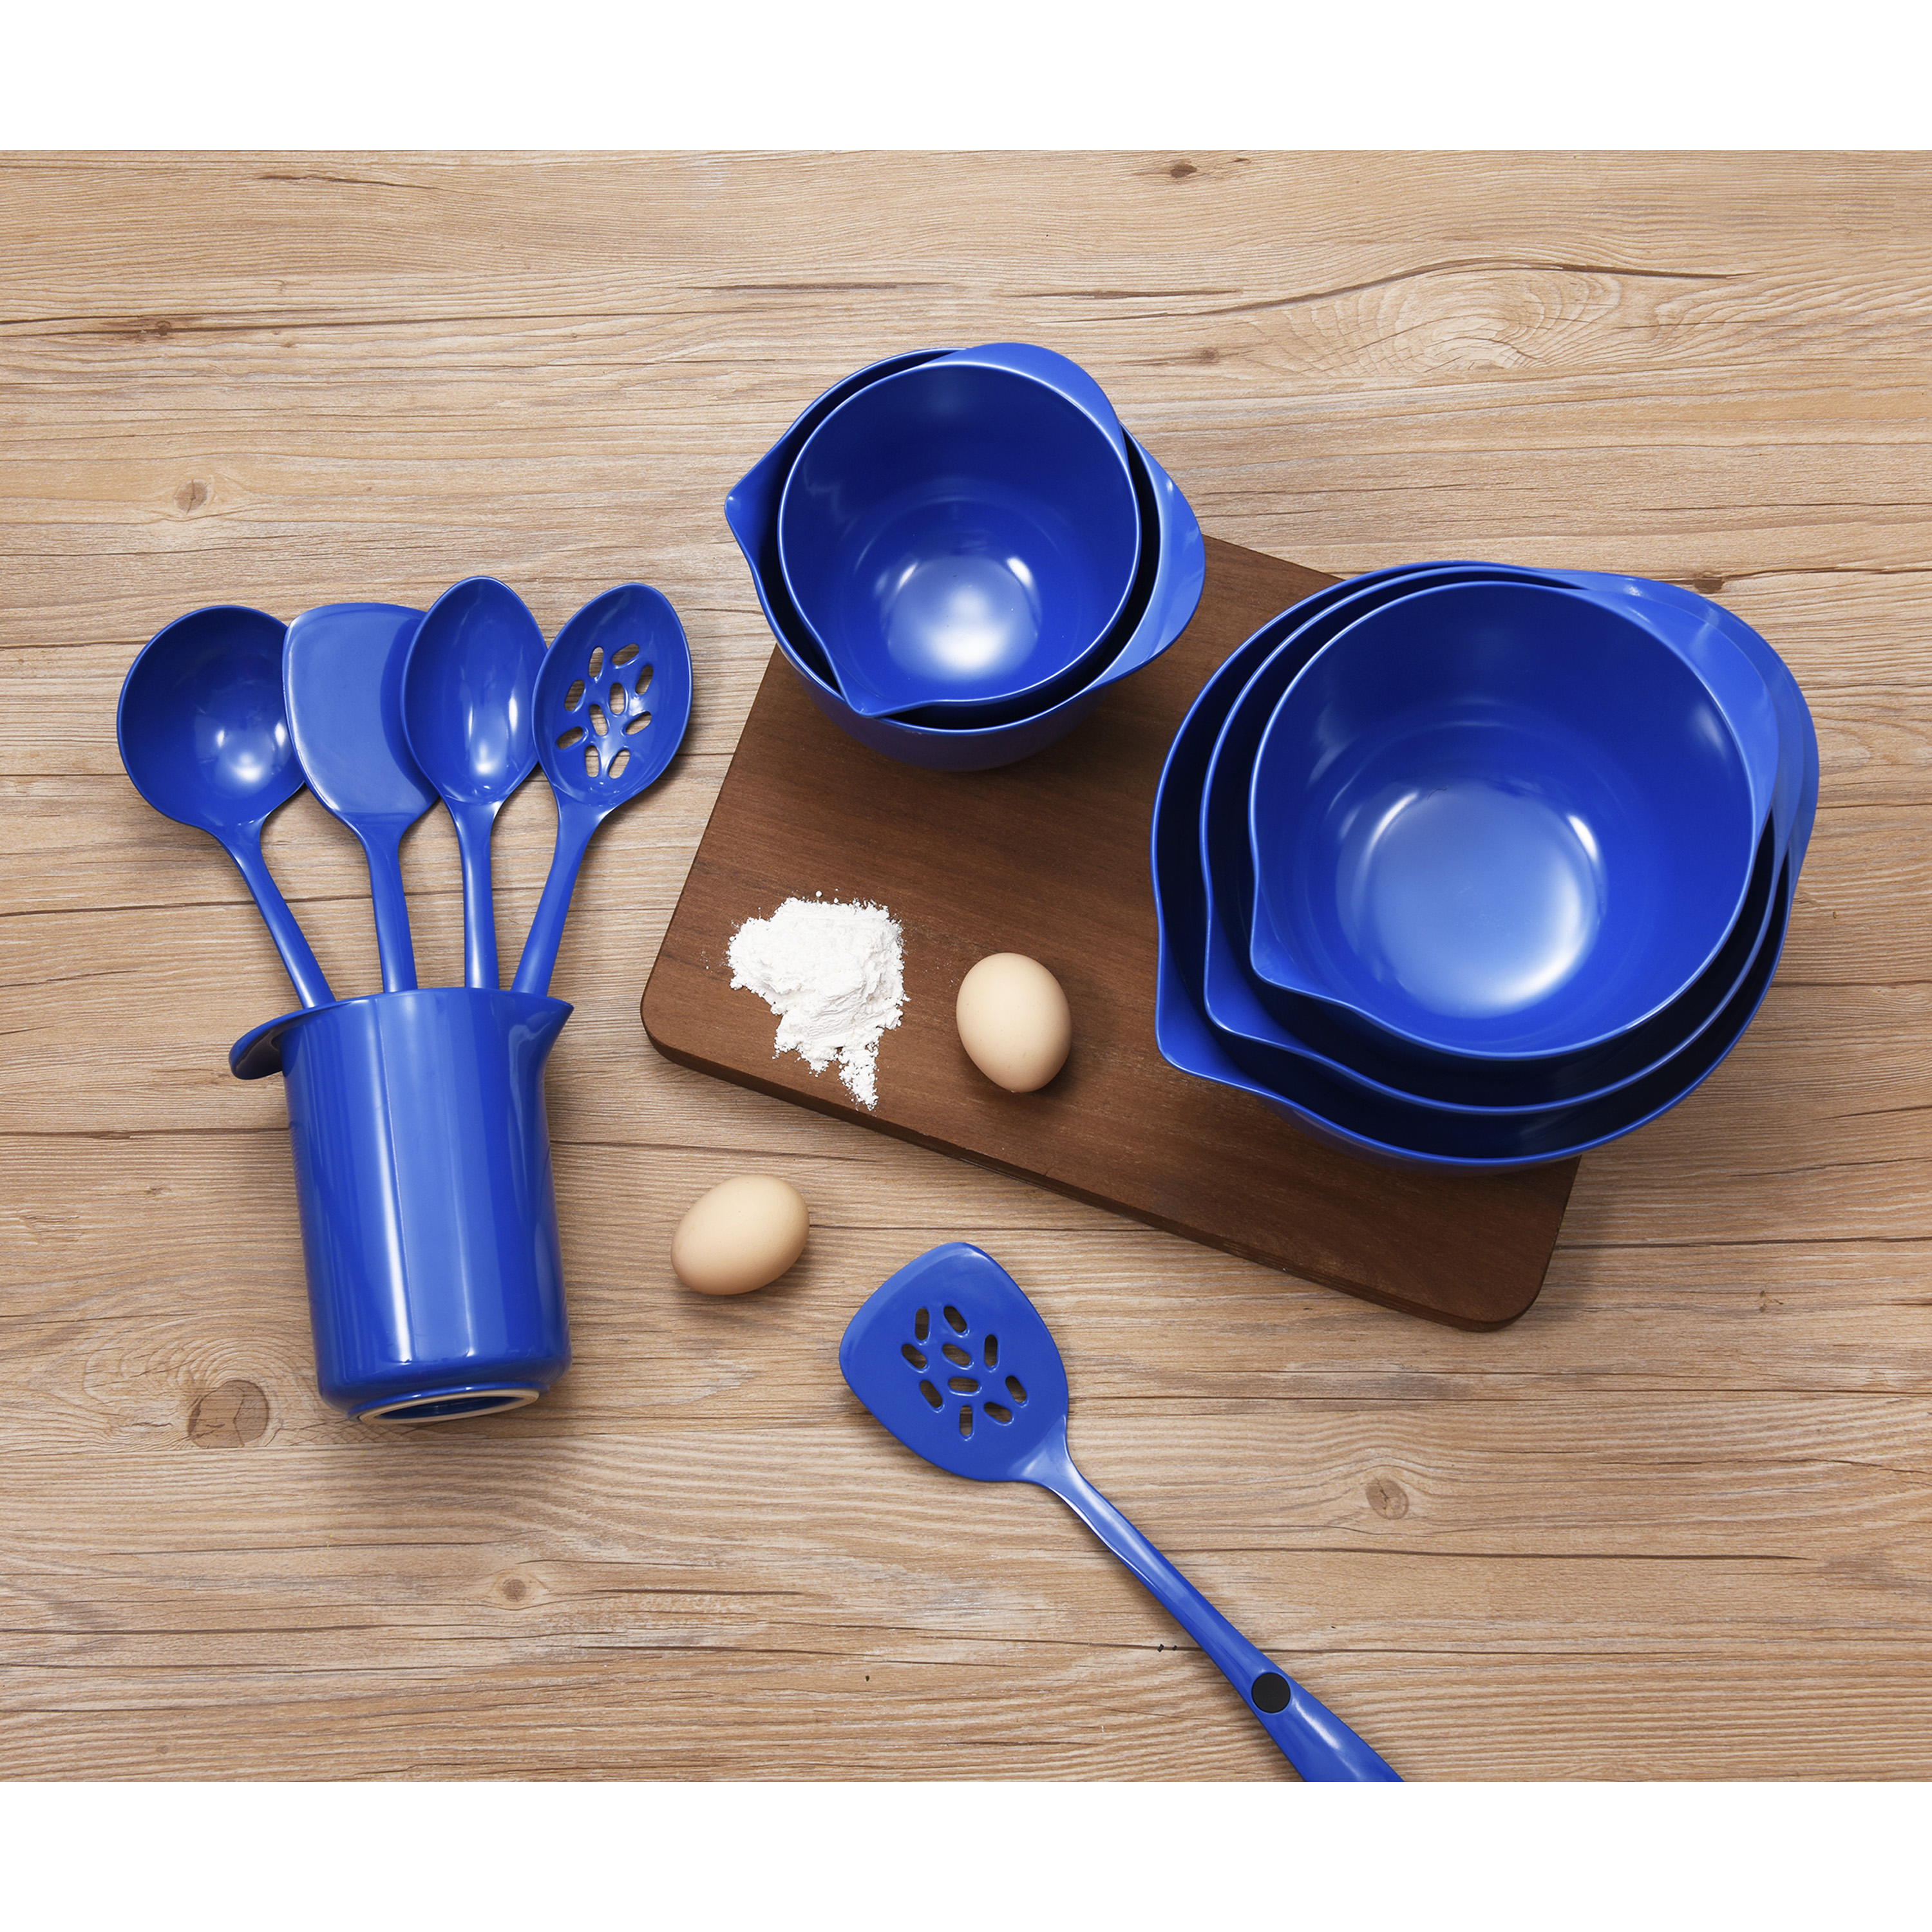 Discontinued - Last Chance Clearance! Mainstays 11PC Melamine Mixing Bowl and Utensil Set- Blue - image 3 of 4